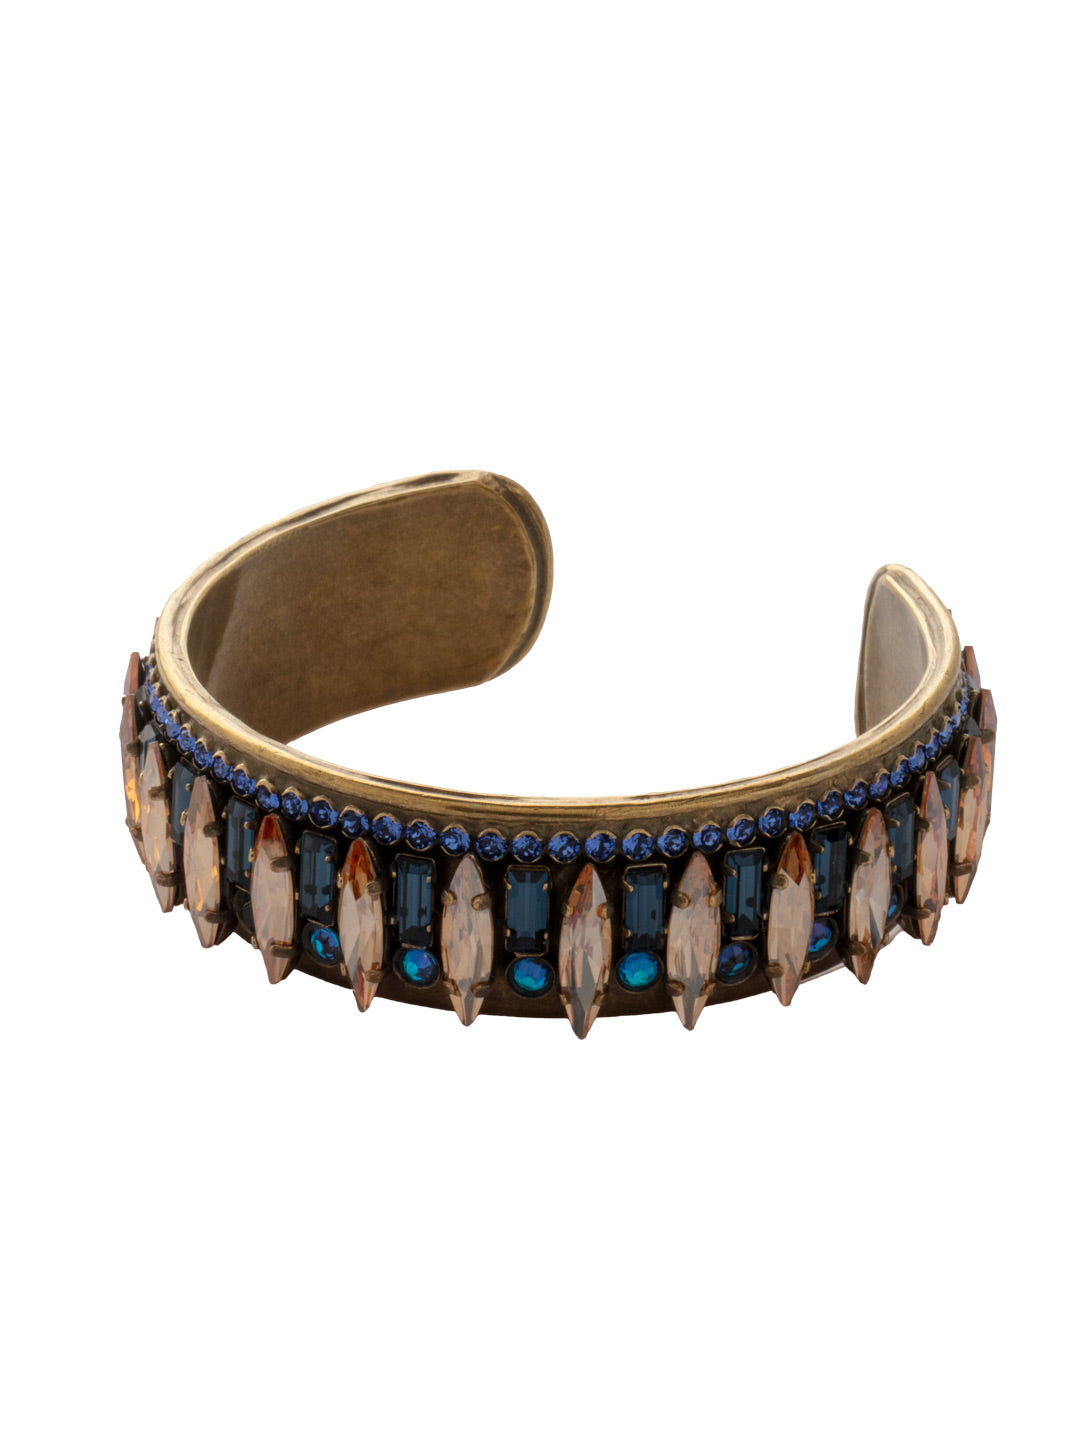 Emory Cuff Bracelet - BFC20AGVBN - <p>The Emory Cuff Bracelet features intricate details; baguette, round, and emerald cut crystals encompass an adjustable cuff band. From Sorrelli's Venice Blue collection in our Antique Gold-tone finish.</p>